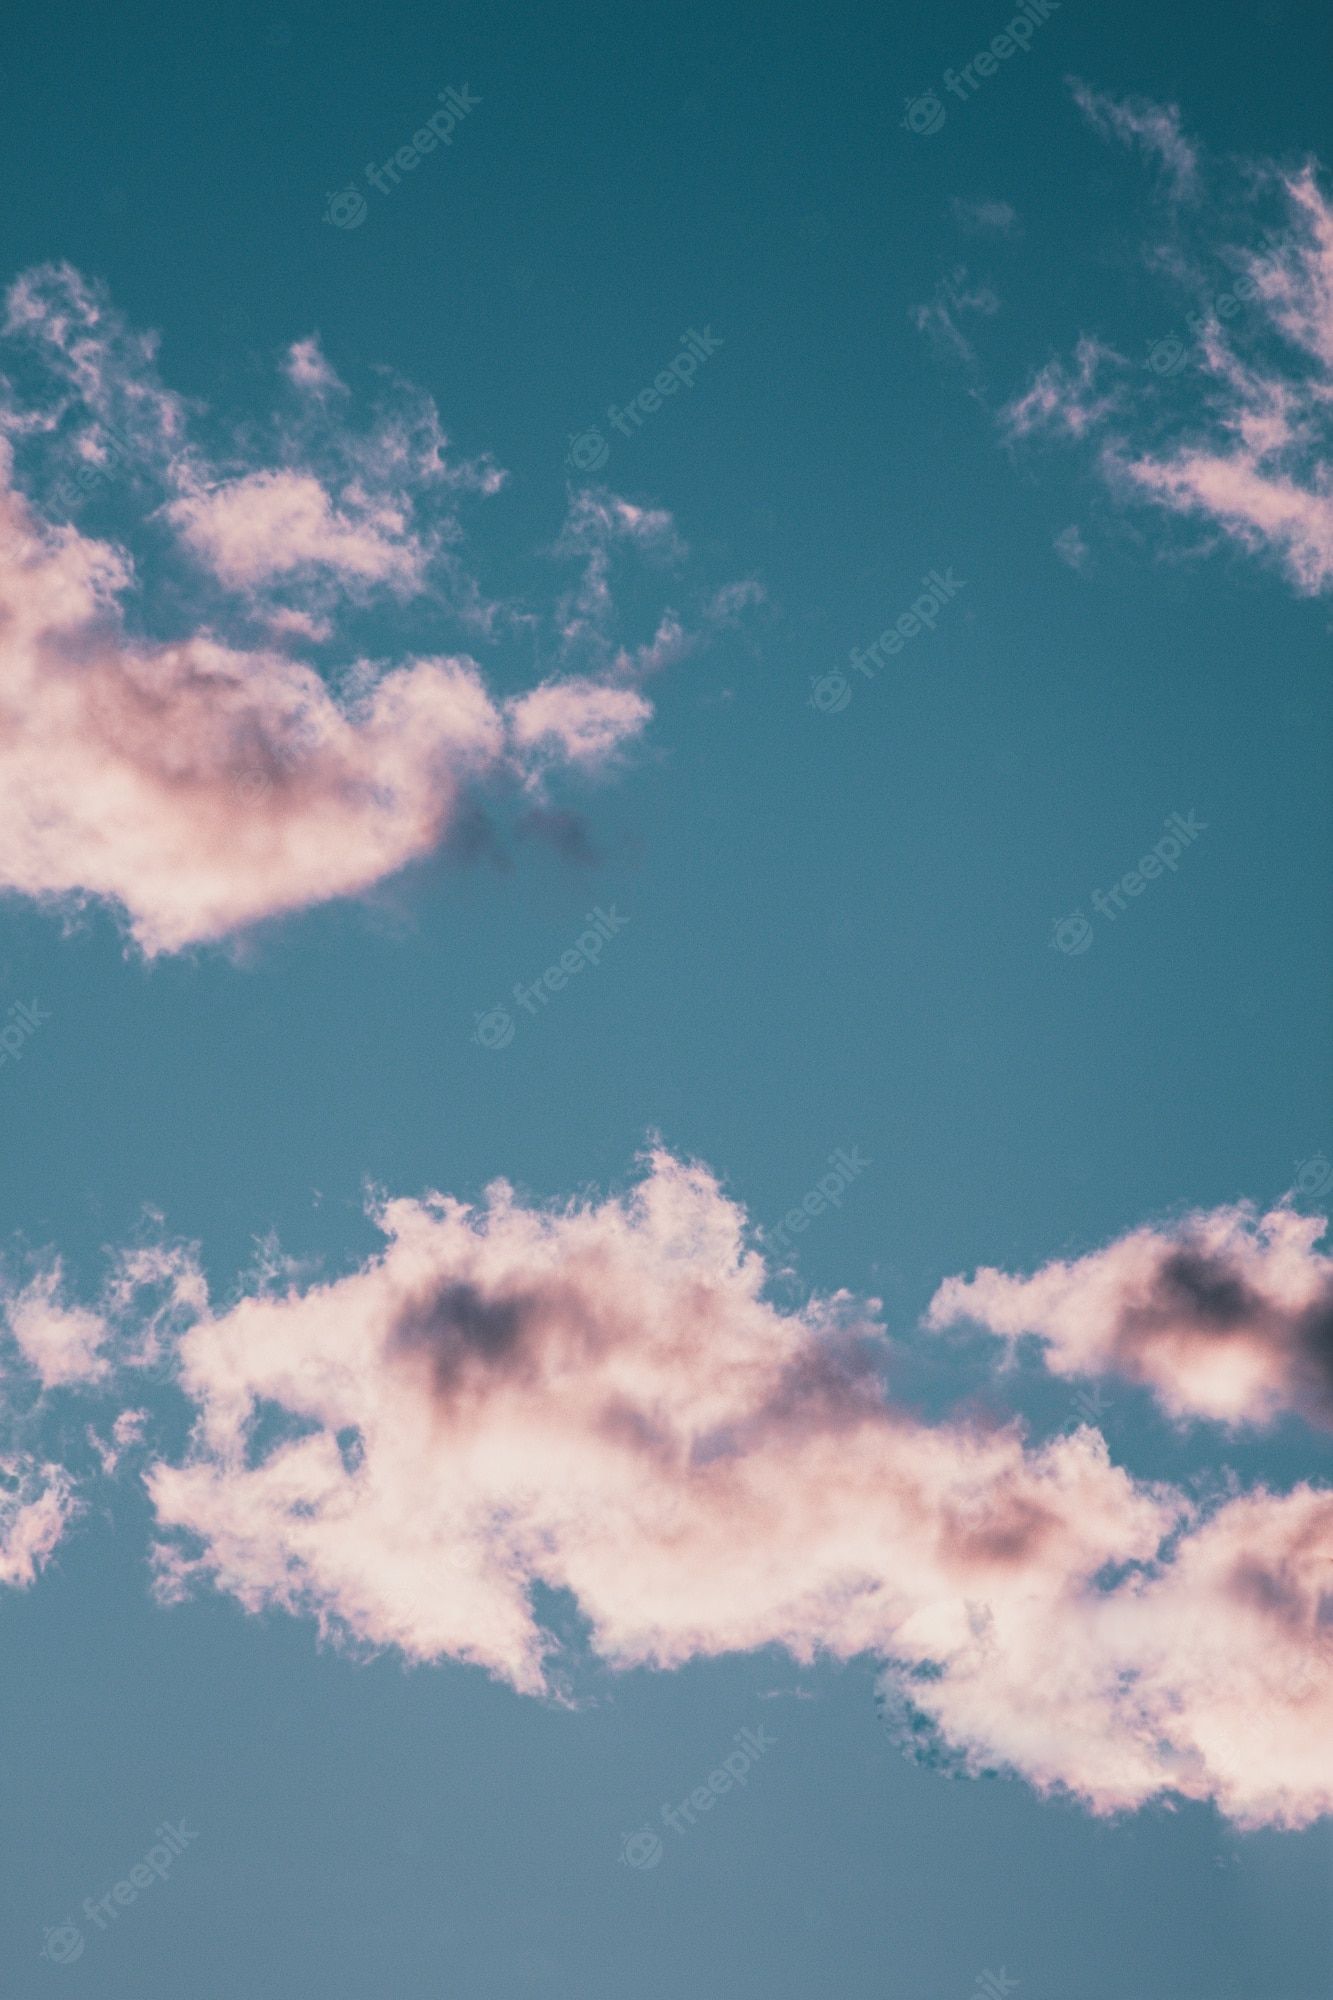 A blue sky with clouds and some pink - Vintage clouds